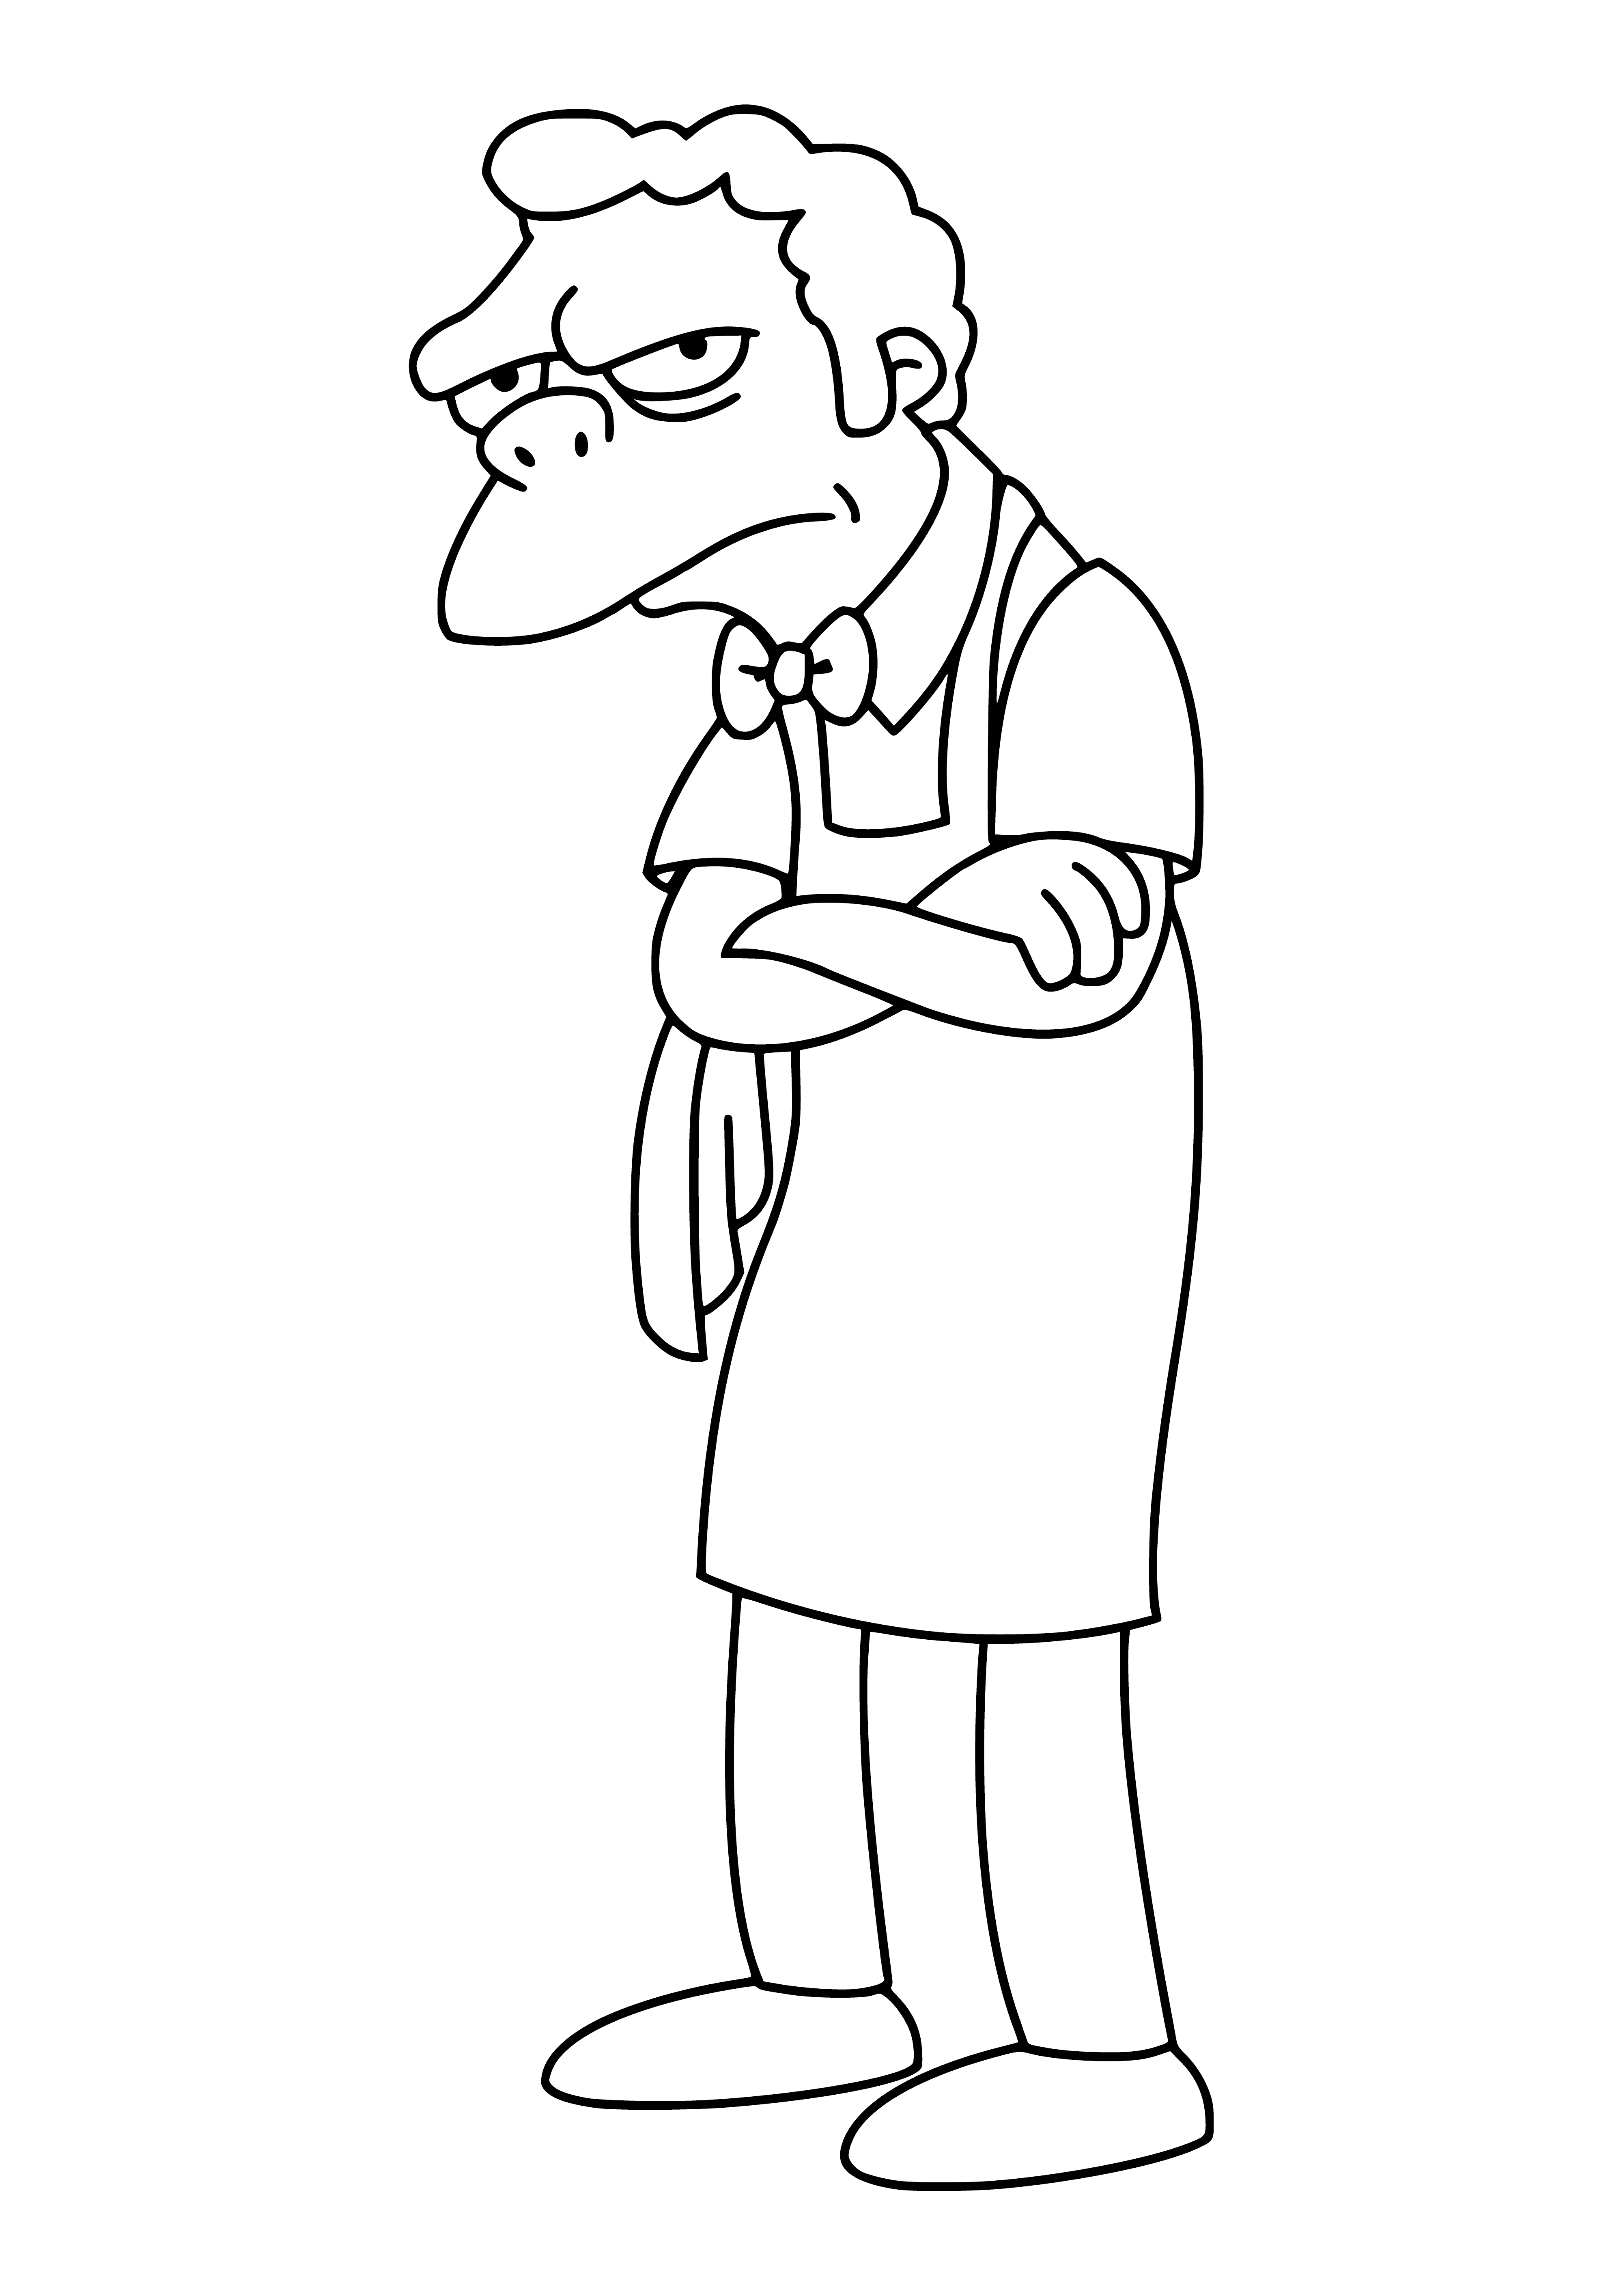 coloring page: Moe, the bartender with a bowtie and mustache, stands behind the bar with a shelf of liquor.